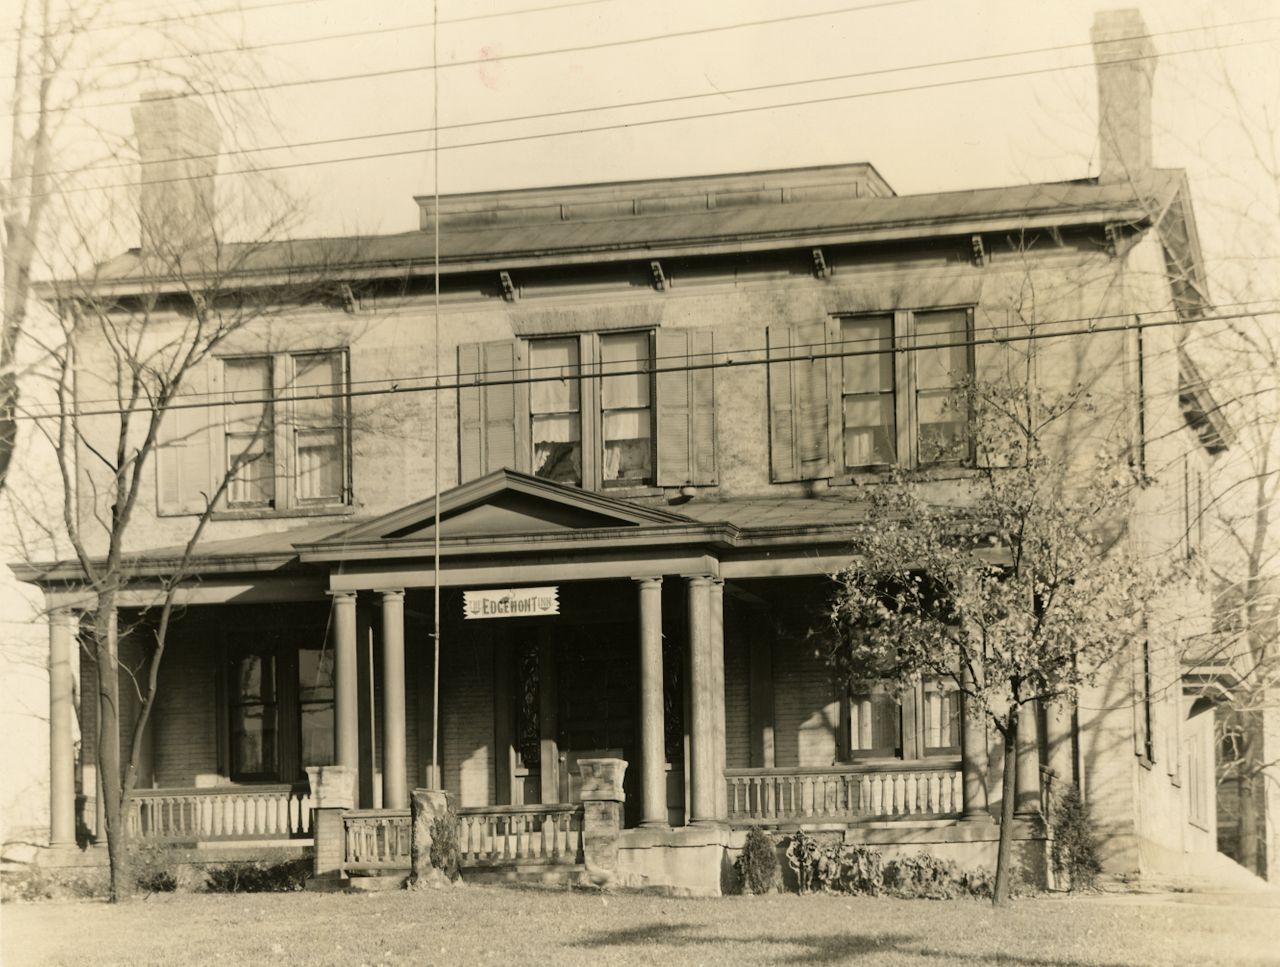 The historic property became a boarding house and tavern for Blacks. It was one of the listings in the Green Book guide. (Photo courtesy of Harriet Beecher Stowe House)